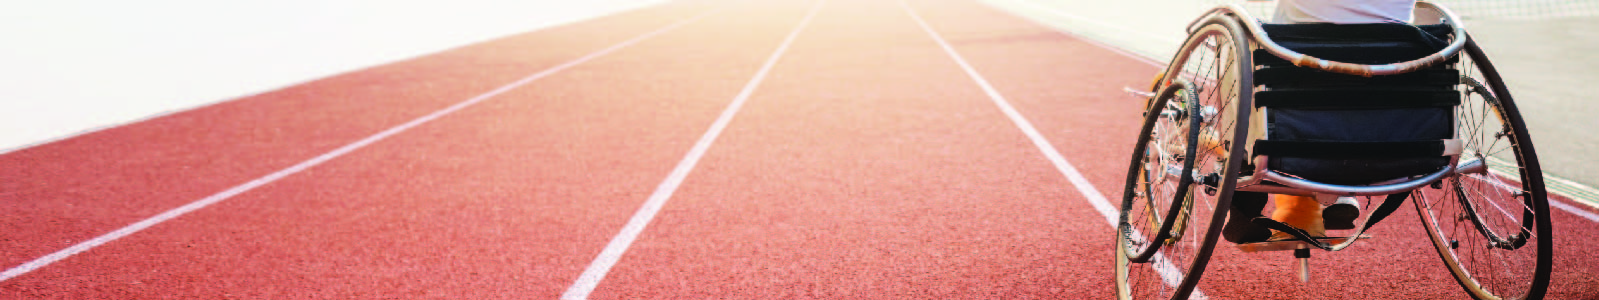 Image of a person in a wheelchair on a track